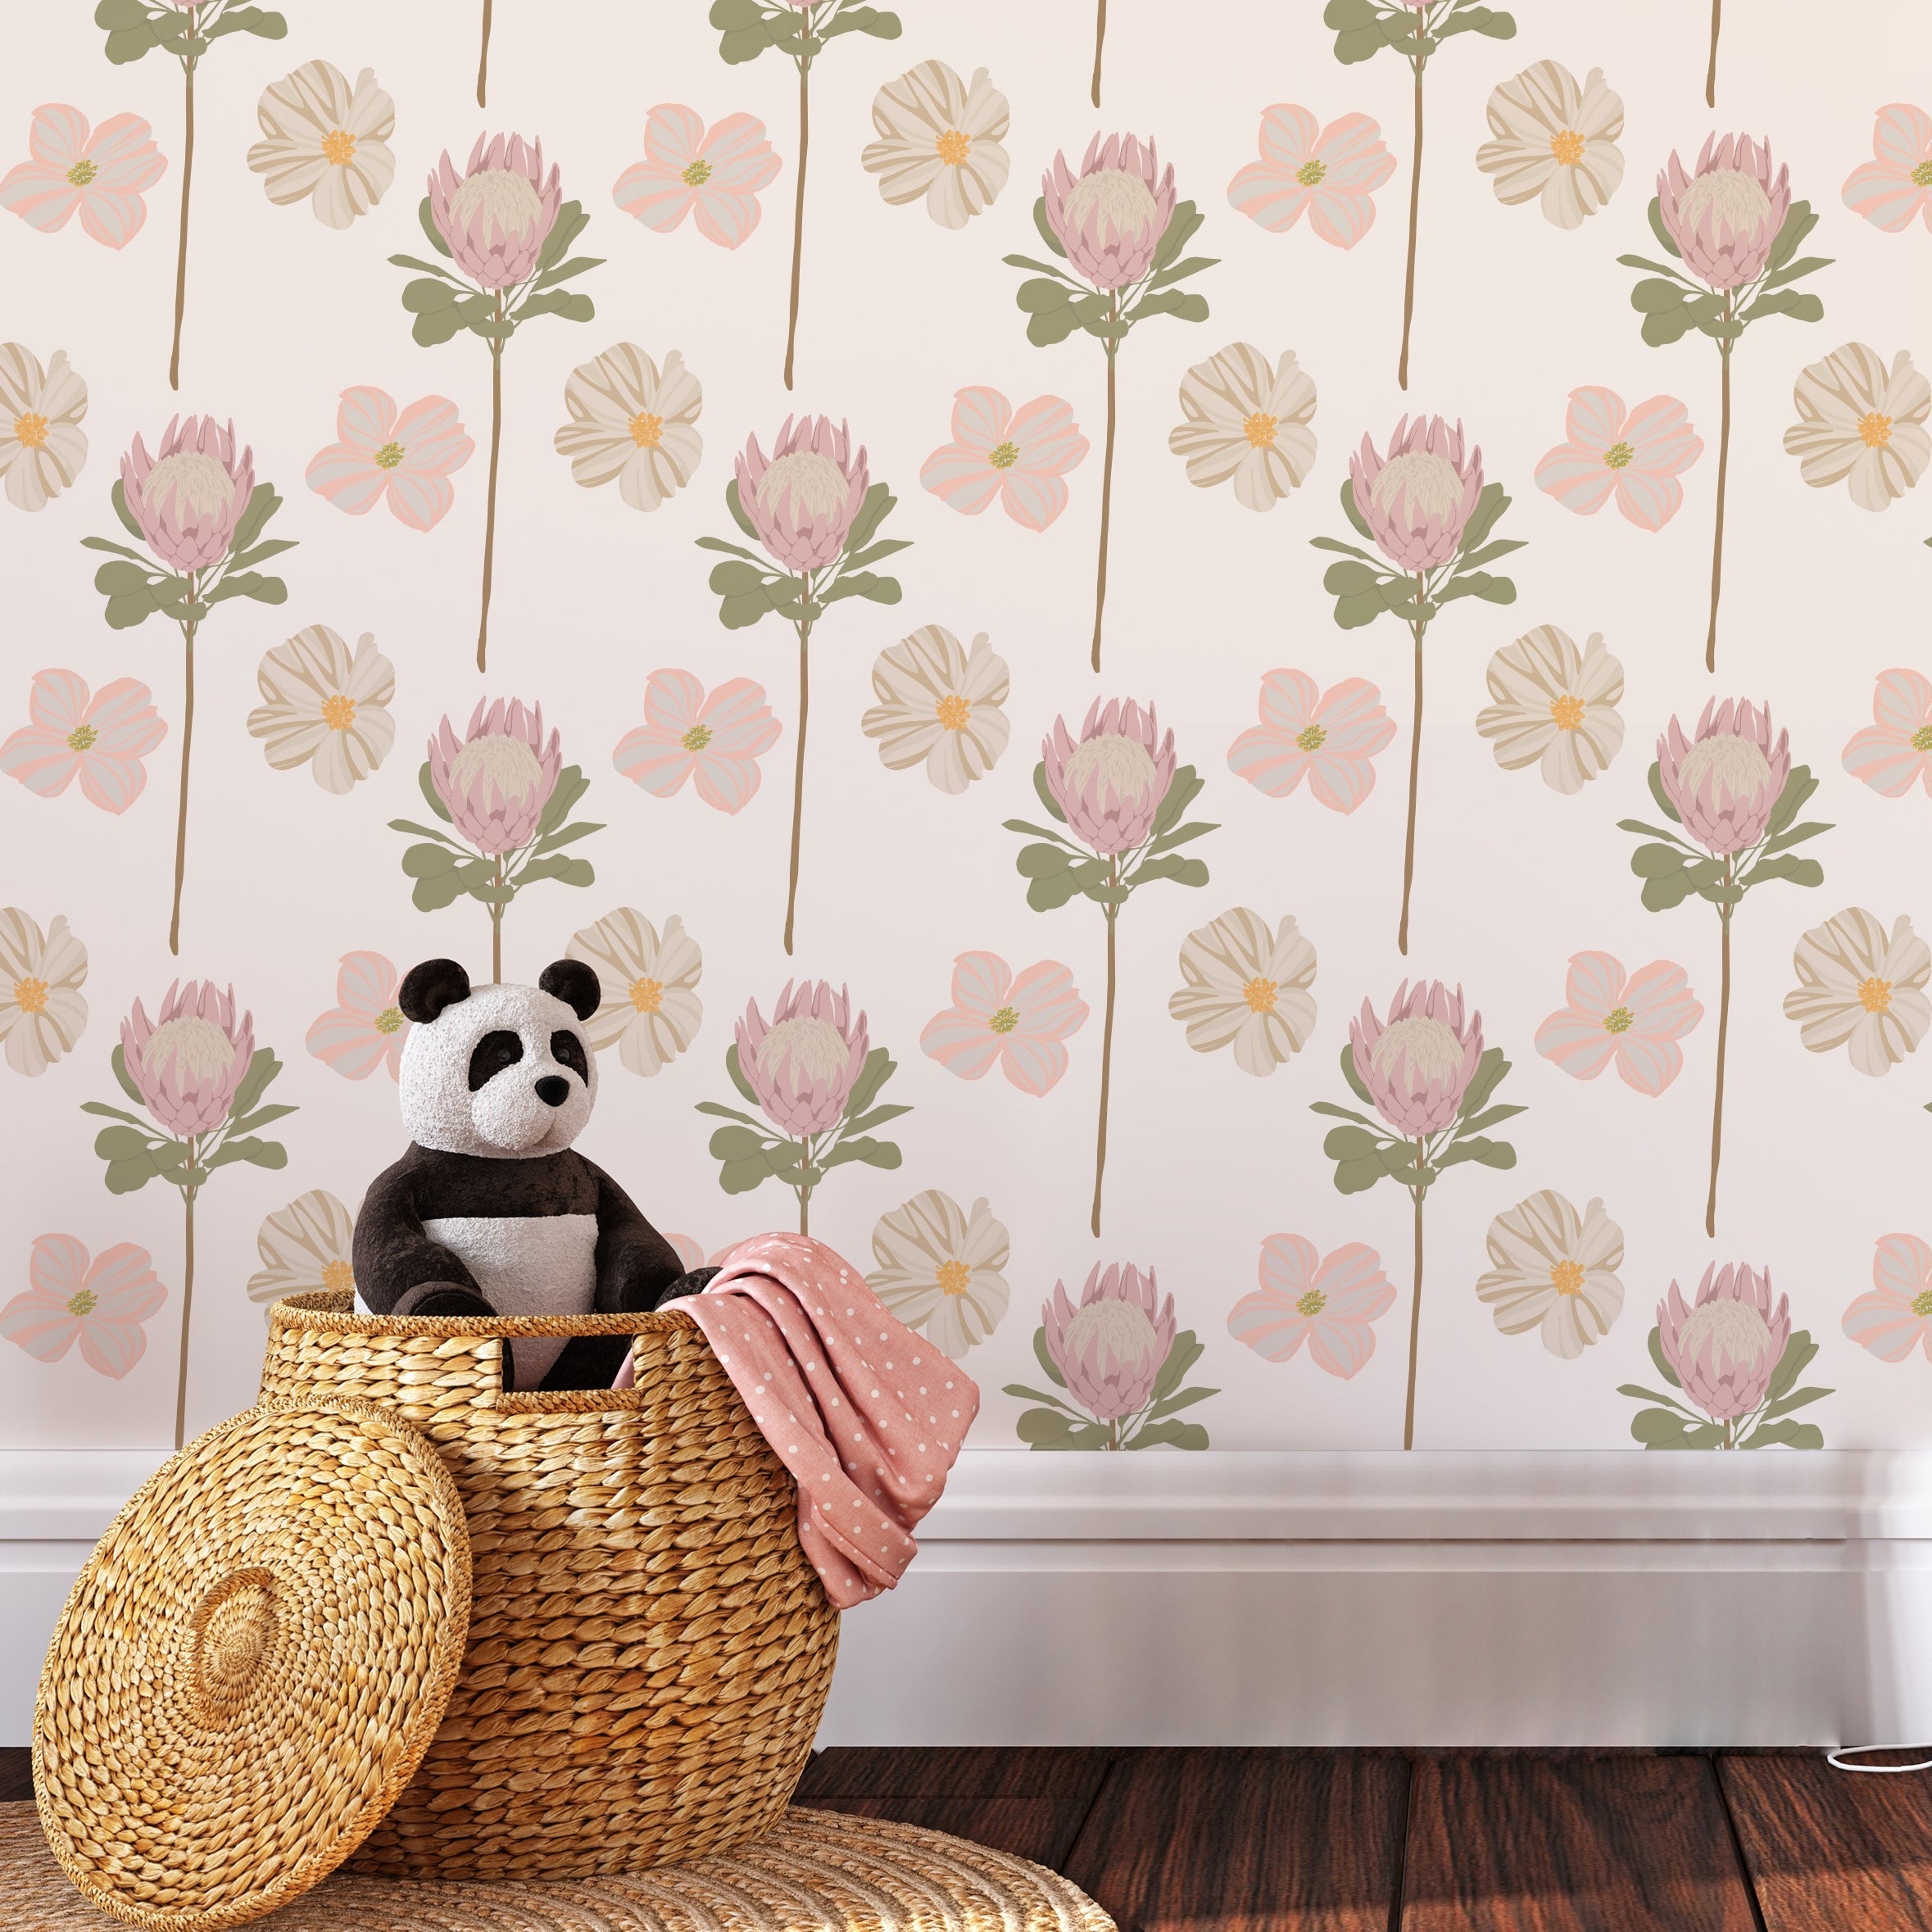 A whimsical scene in a nursery featuring 'Retro Pastel Flower Wallpaper' adorned with tall, stylized pink clover blooms and soft pastel flowers against a neutral backdrop, complemented by a playful panda plush in a woven basket.